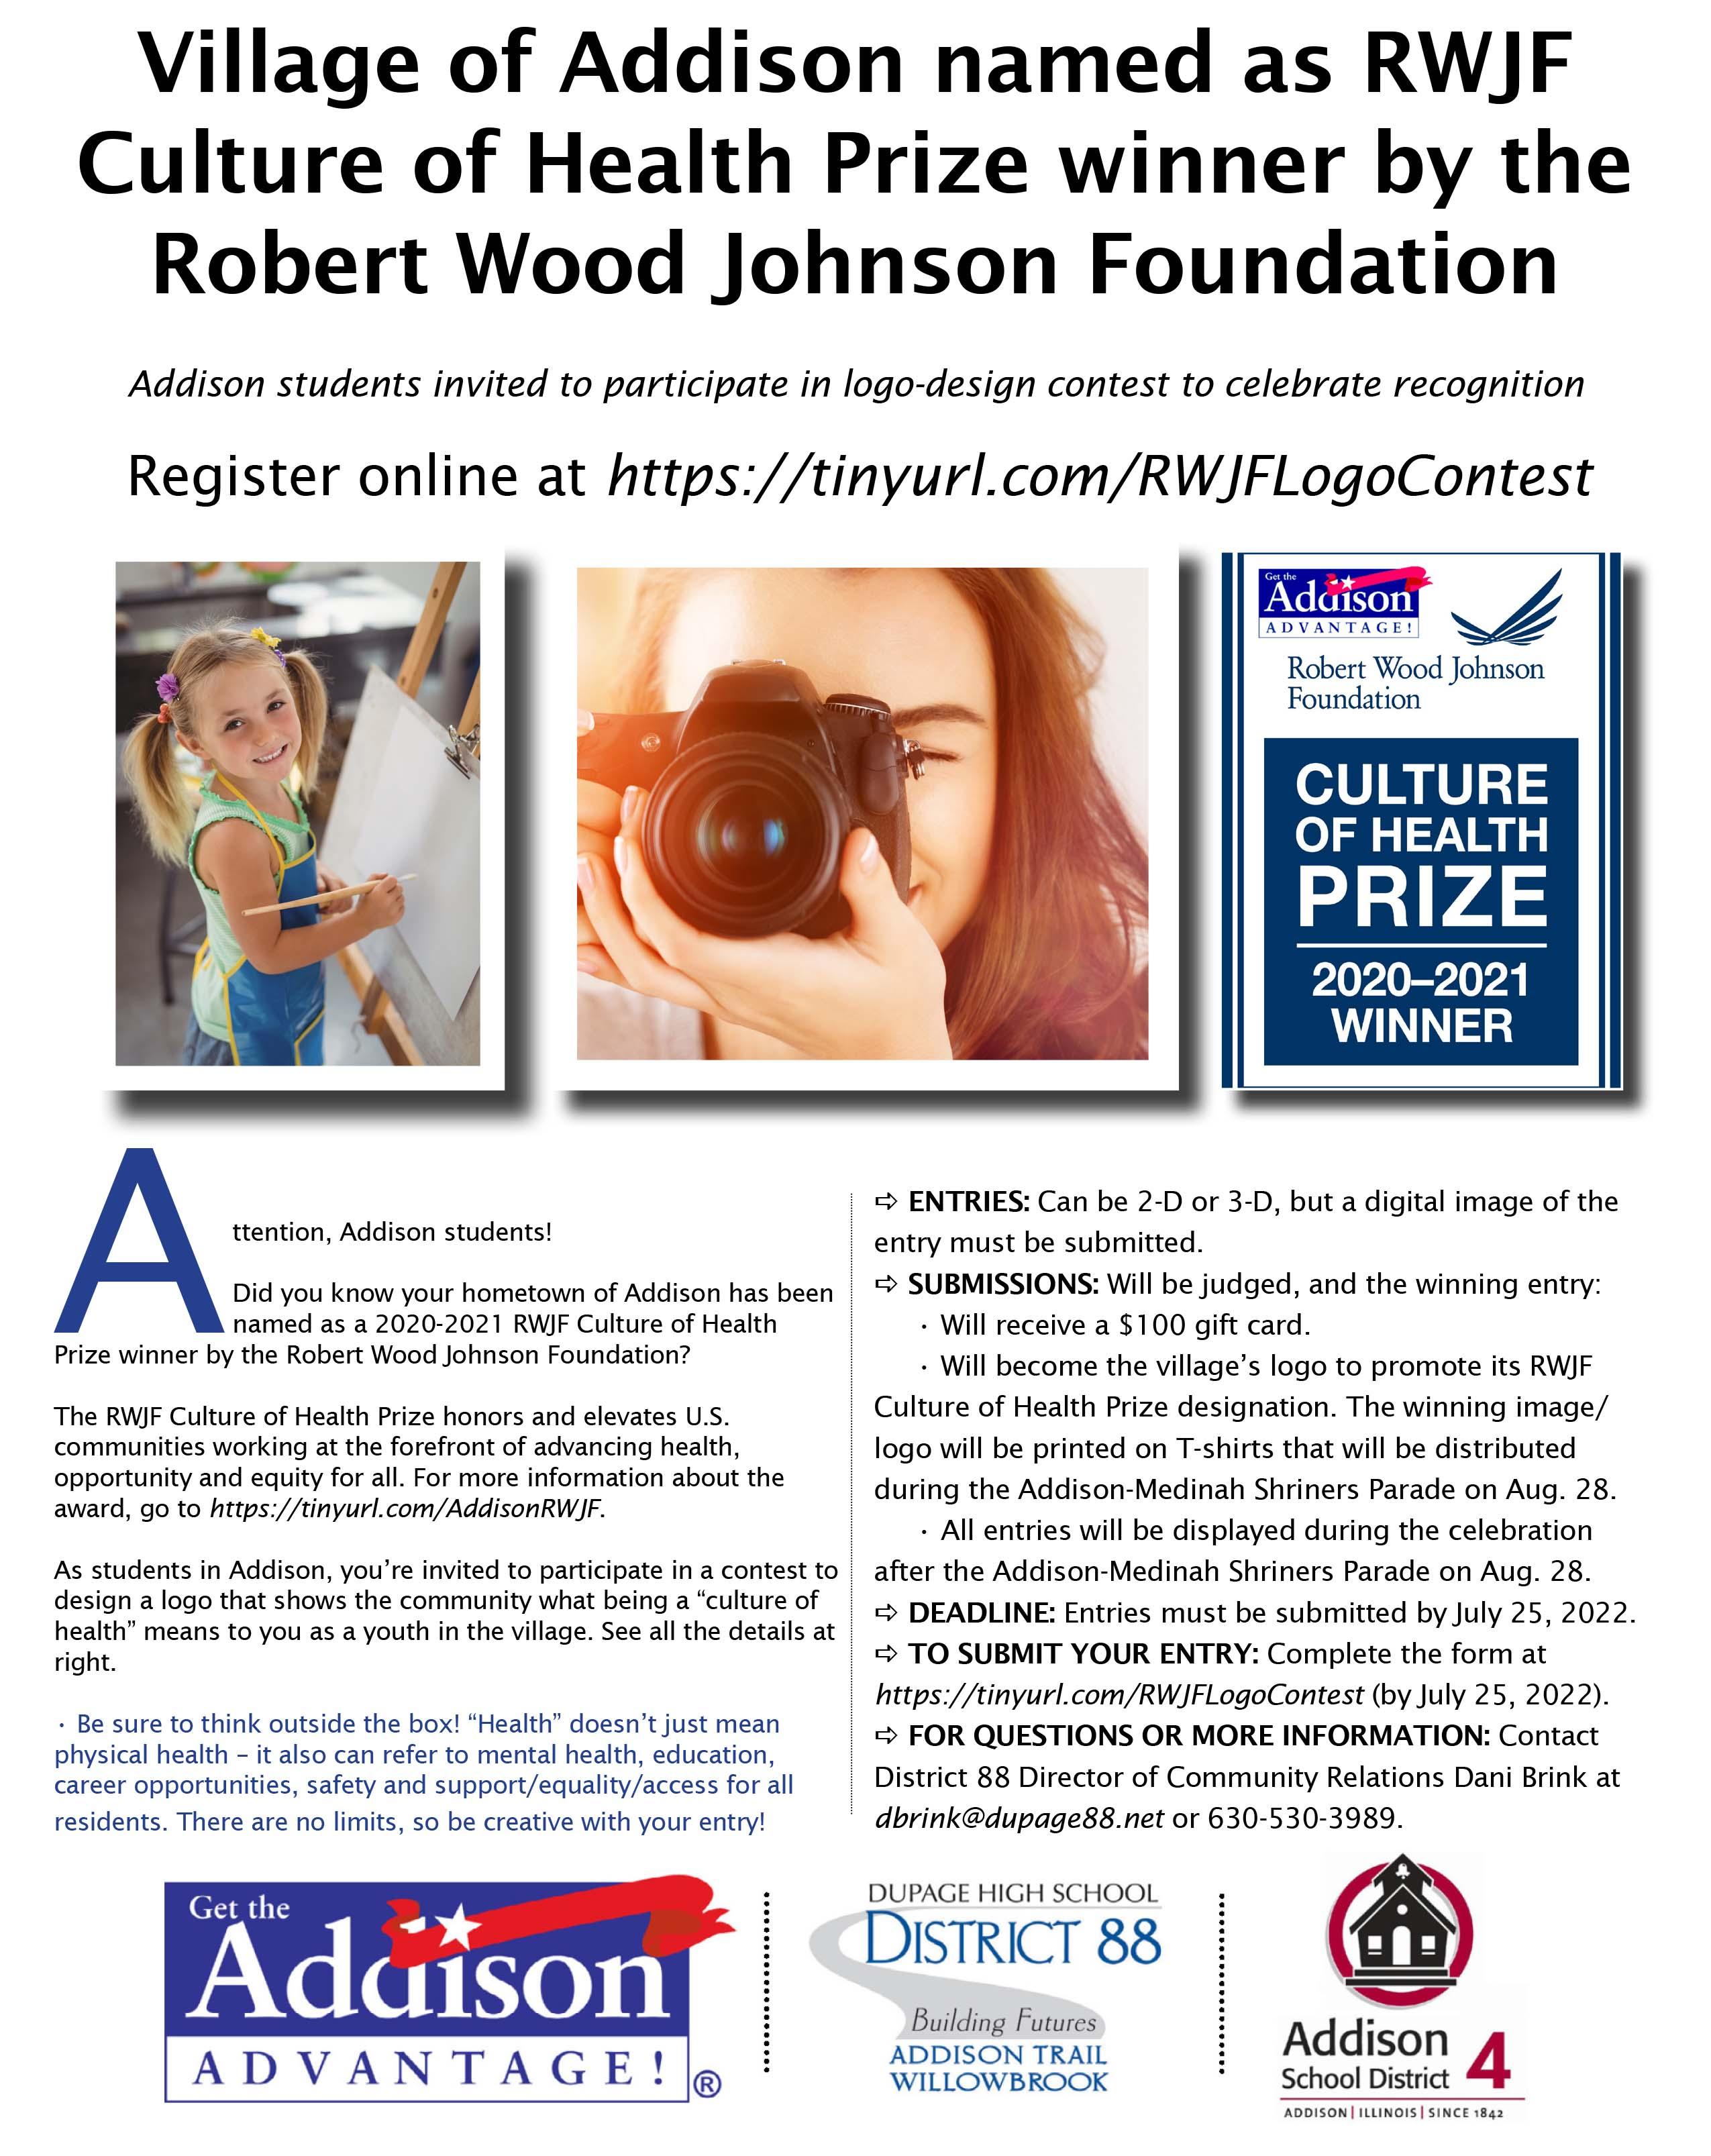 Village of Addison named as RWJF Culture of Health Prize winner by the Robert Wood Johnson Foundation: Addison students invited to participate in logo-design contest to celebrate recognition